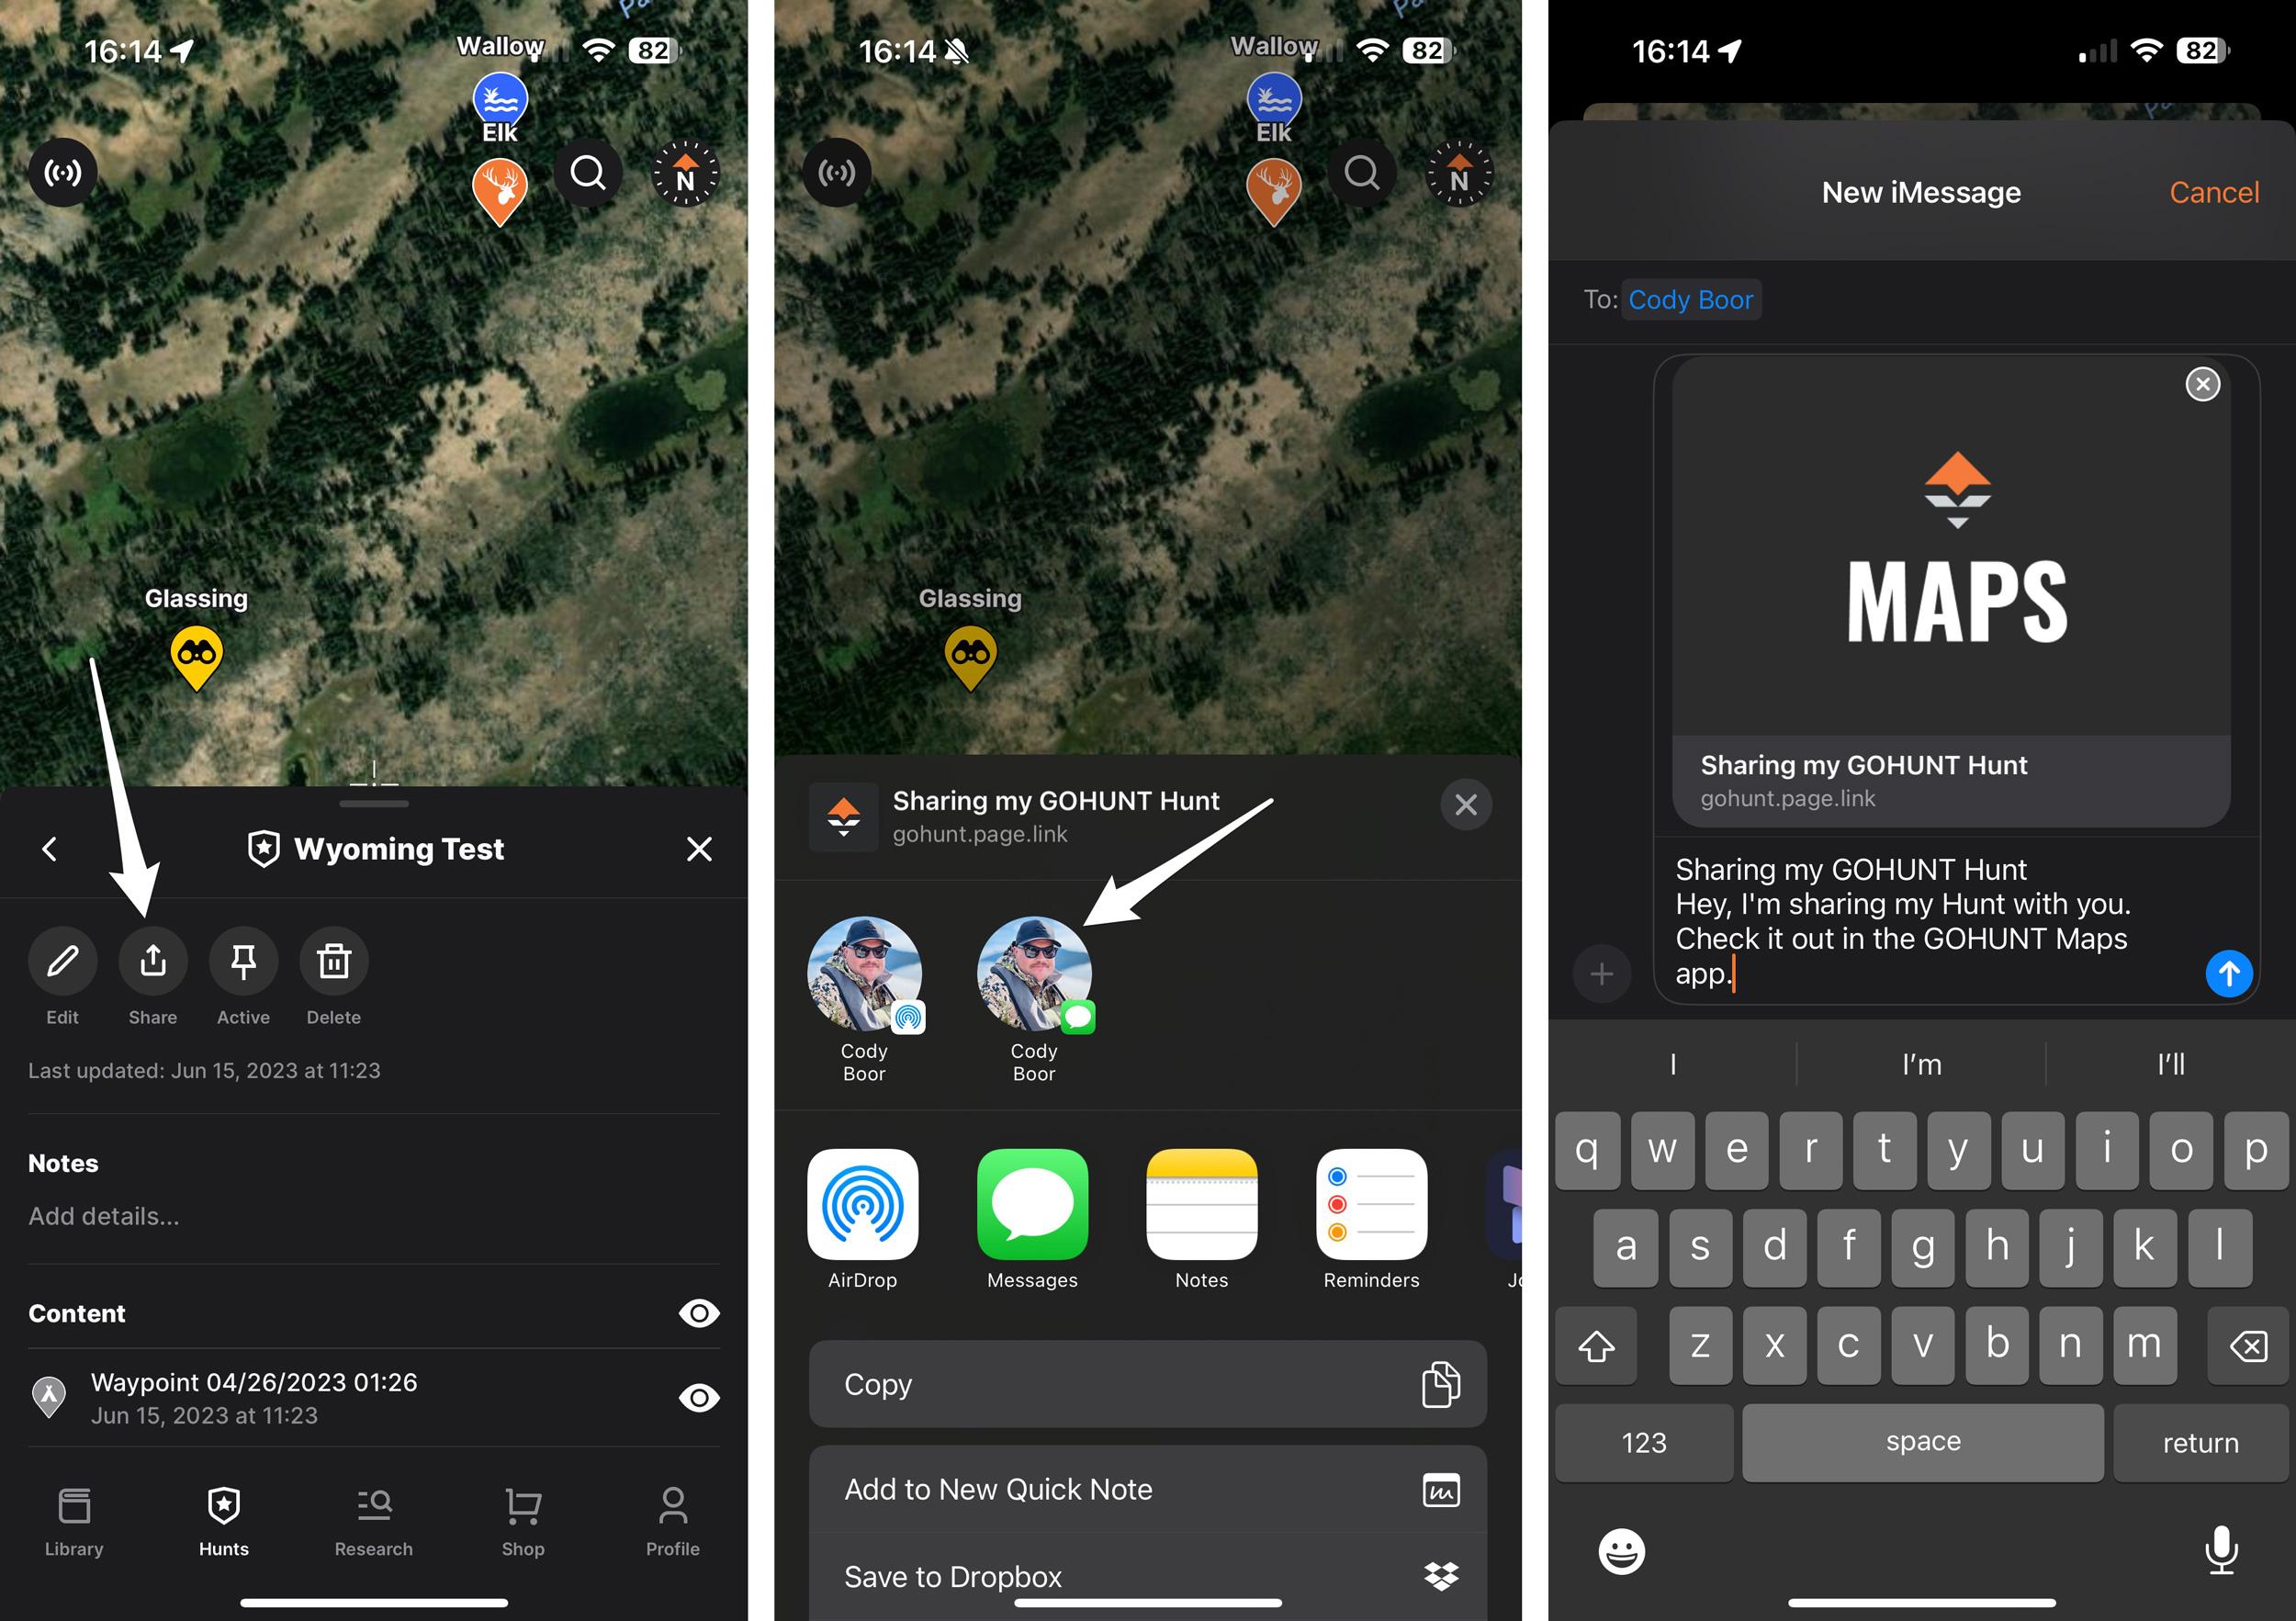 How to share a folder of hunting waypoints on GOHUNT mobile app